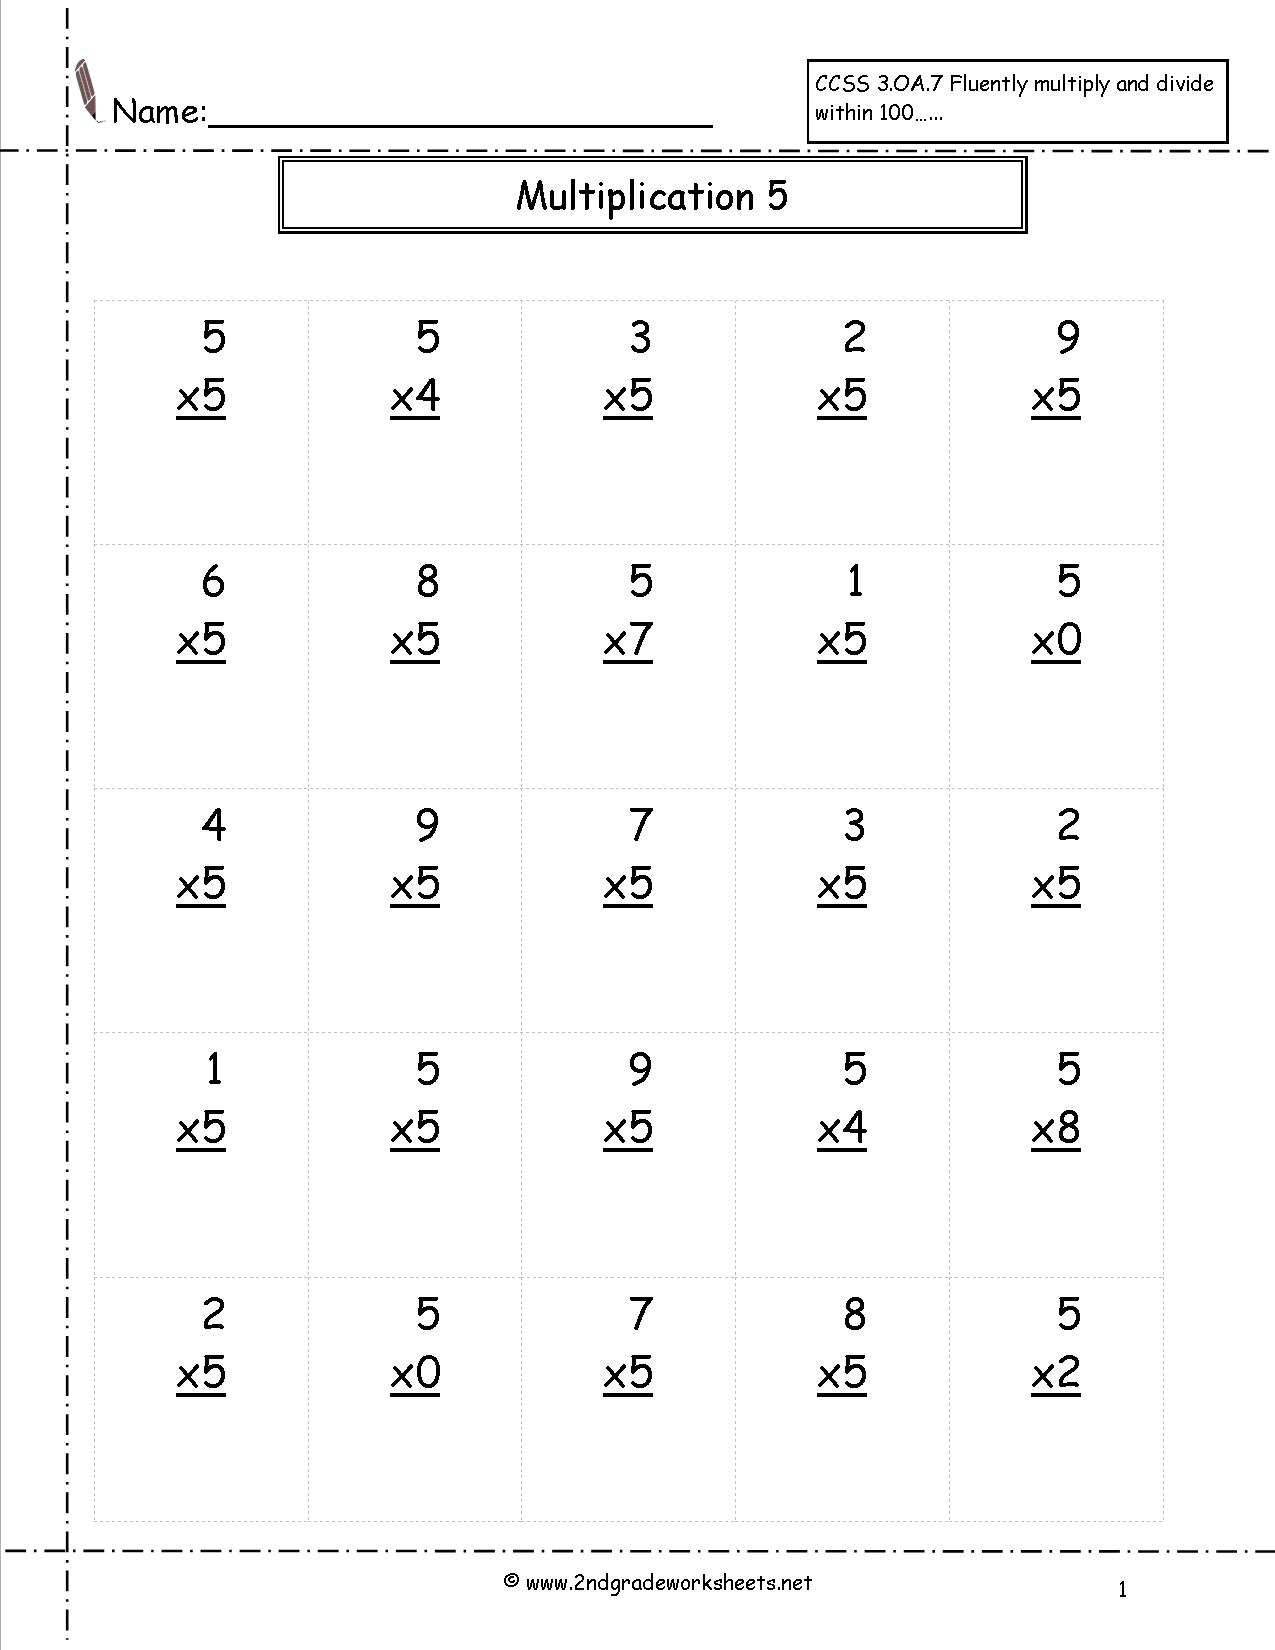 Multiplication Worksheets And Printouts in Multiplication Worksheets Number 5